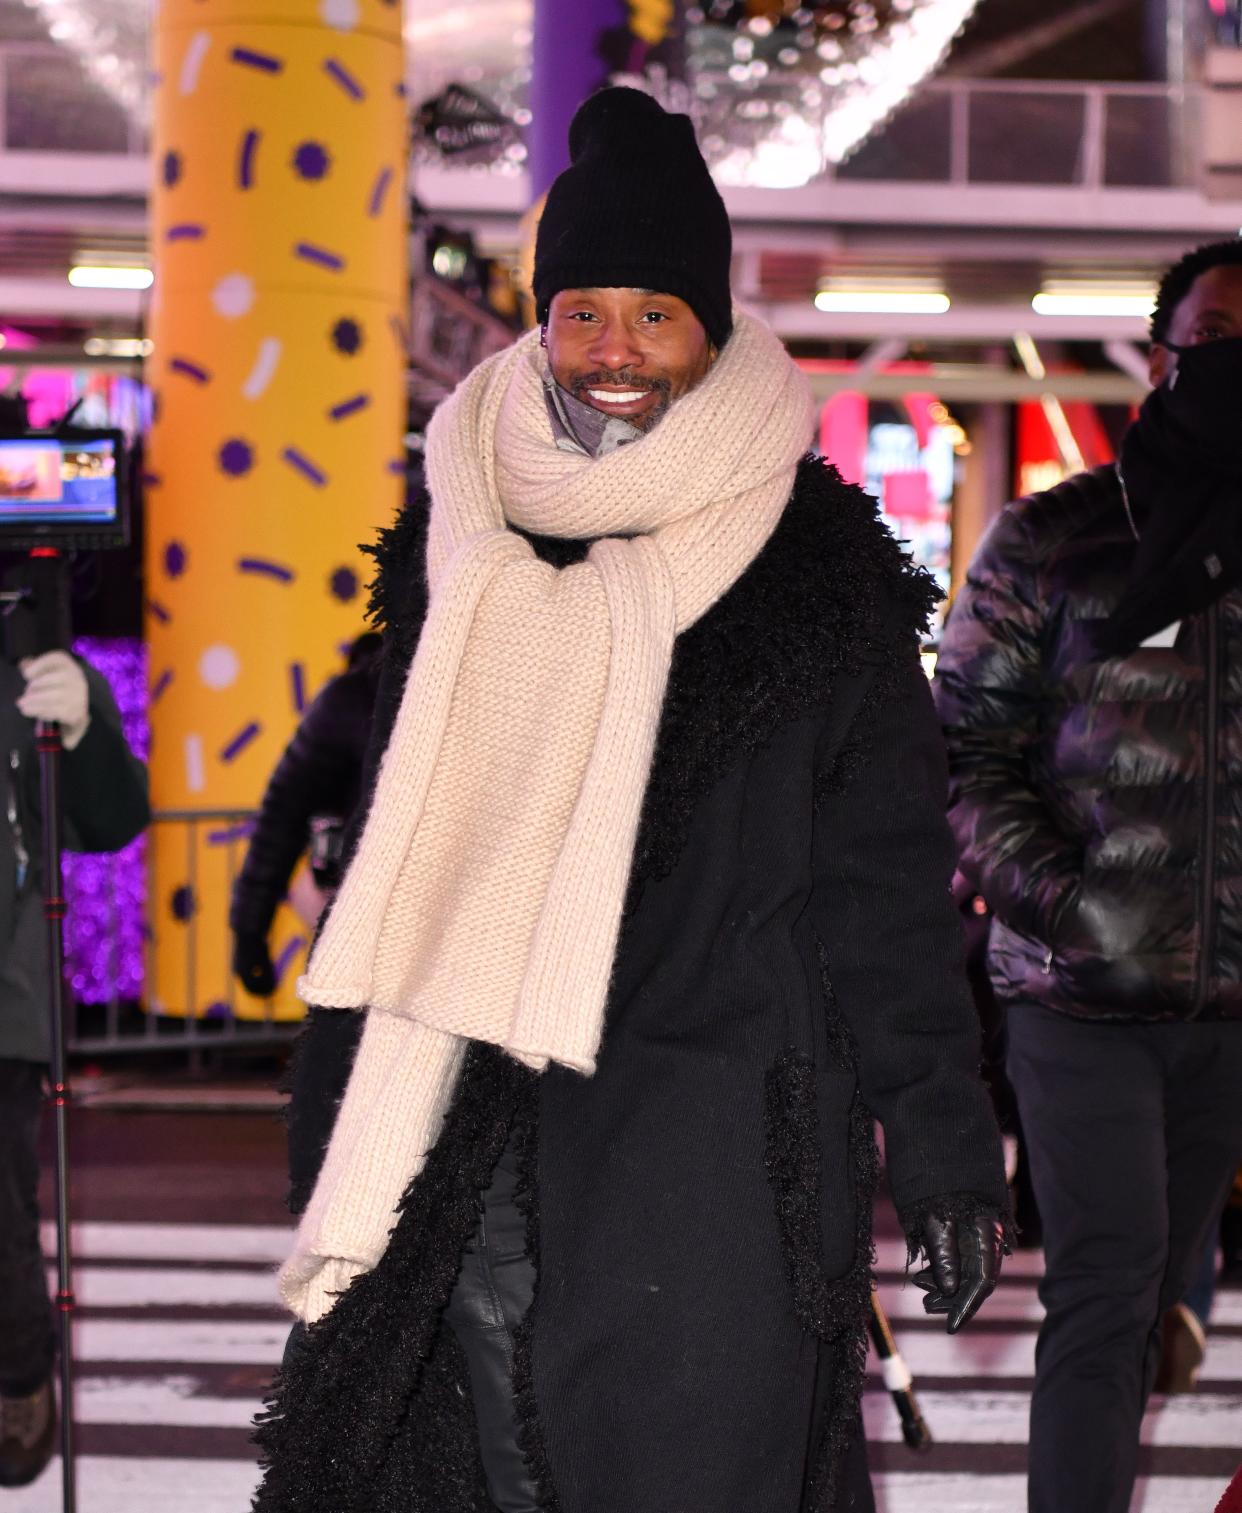 Billy Porter rehearses for New Year's Eve 2021 in Times Square on Dec. 29, 2020, in New York City.